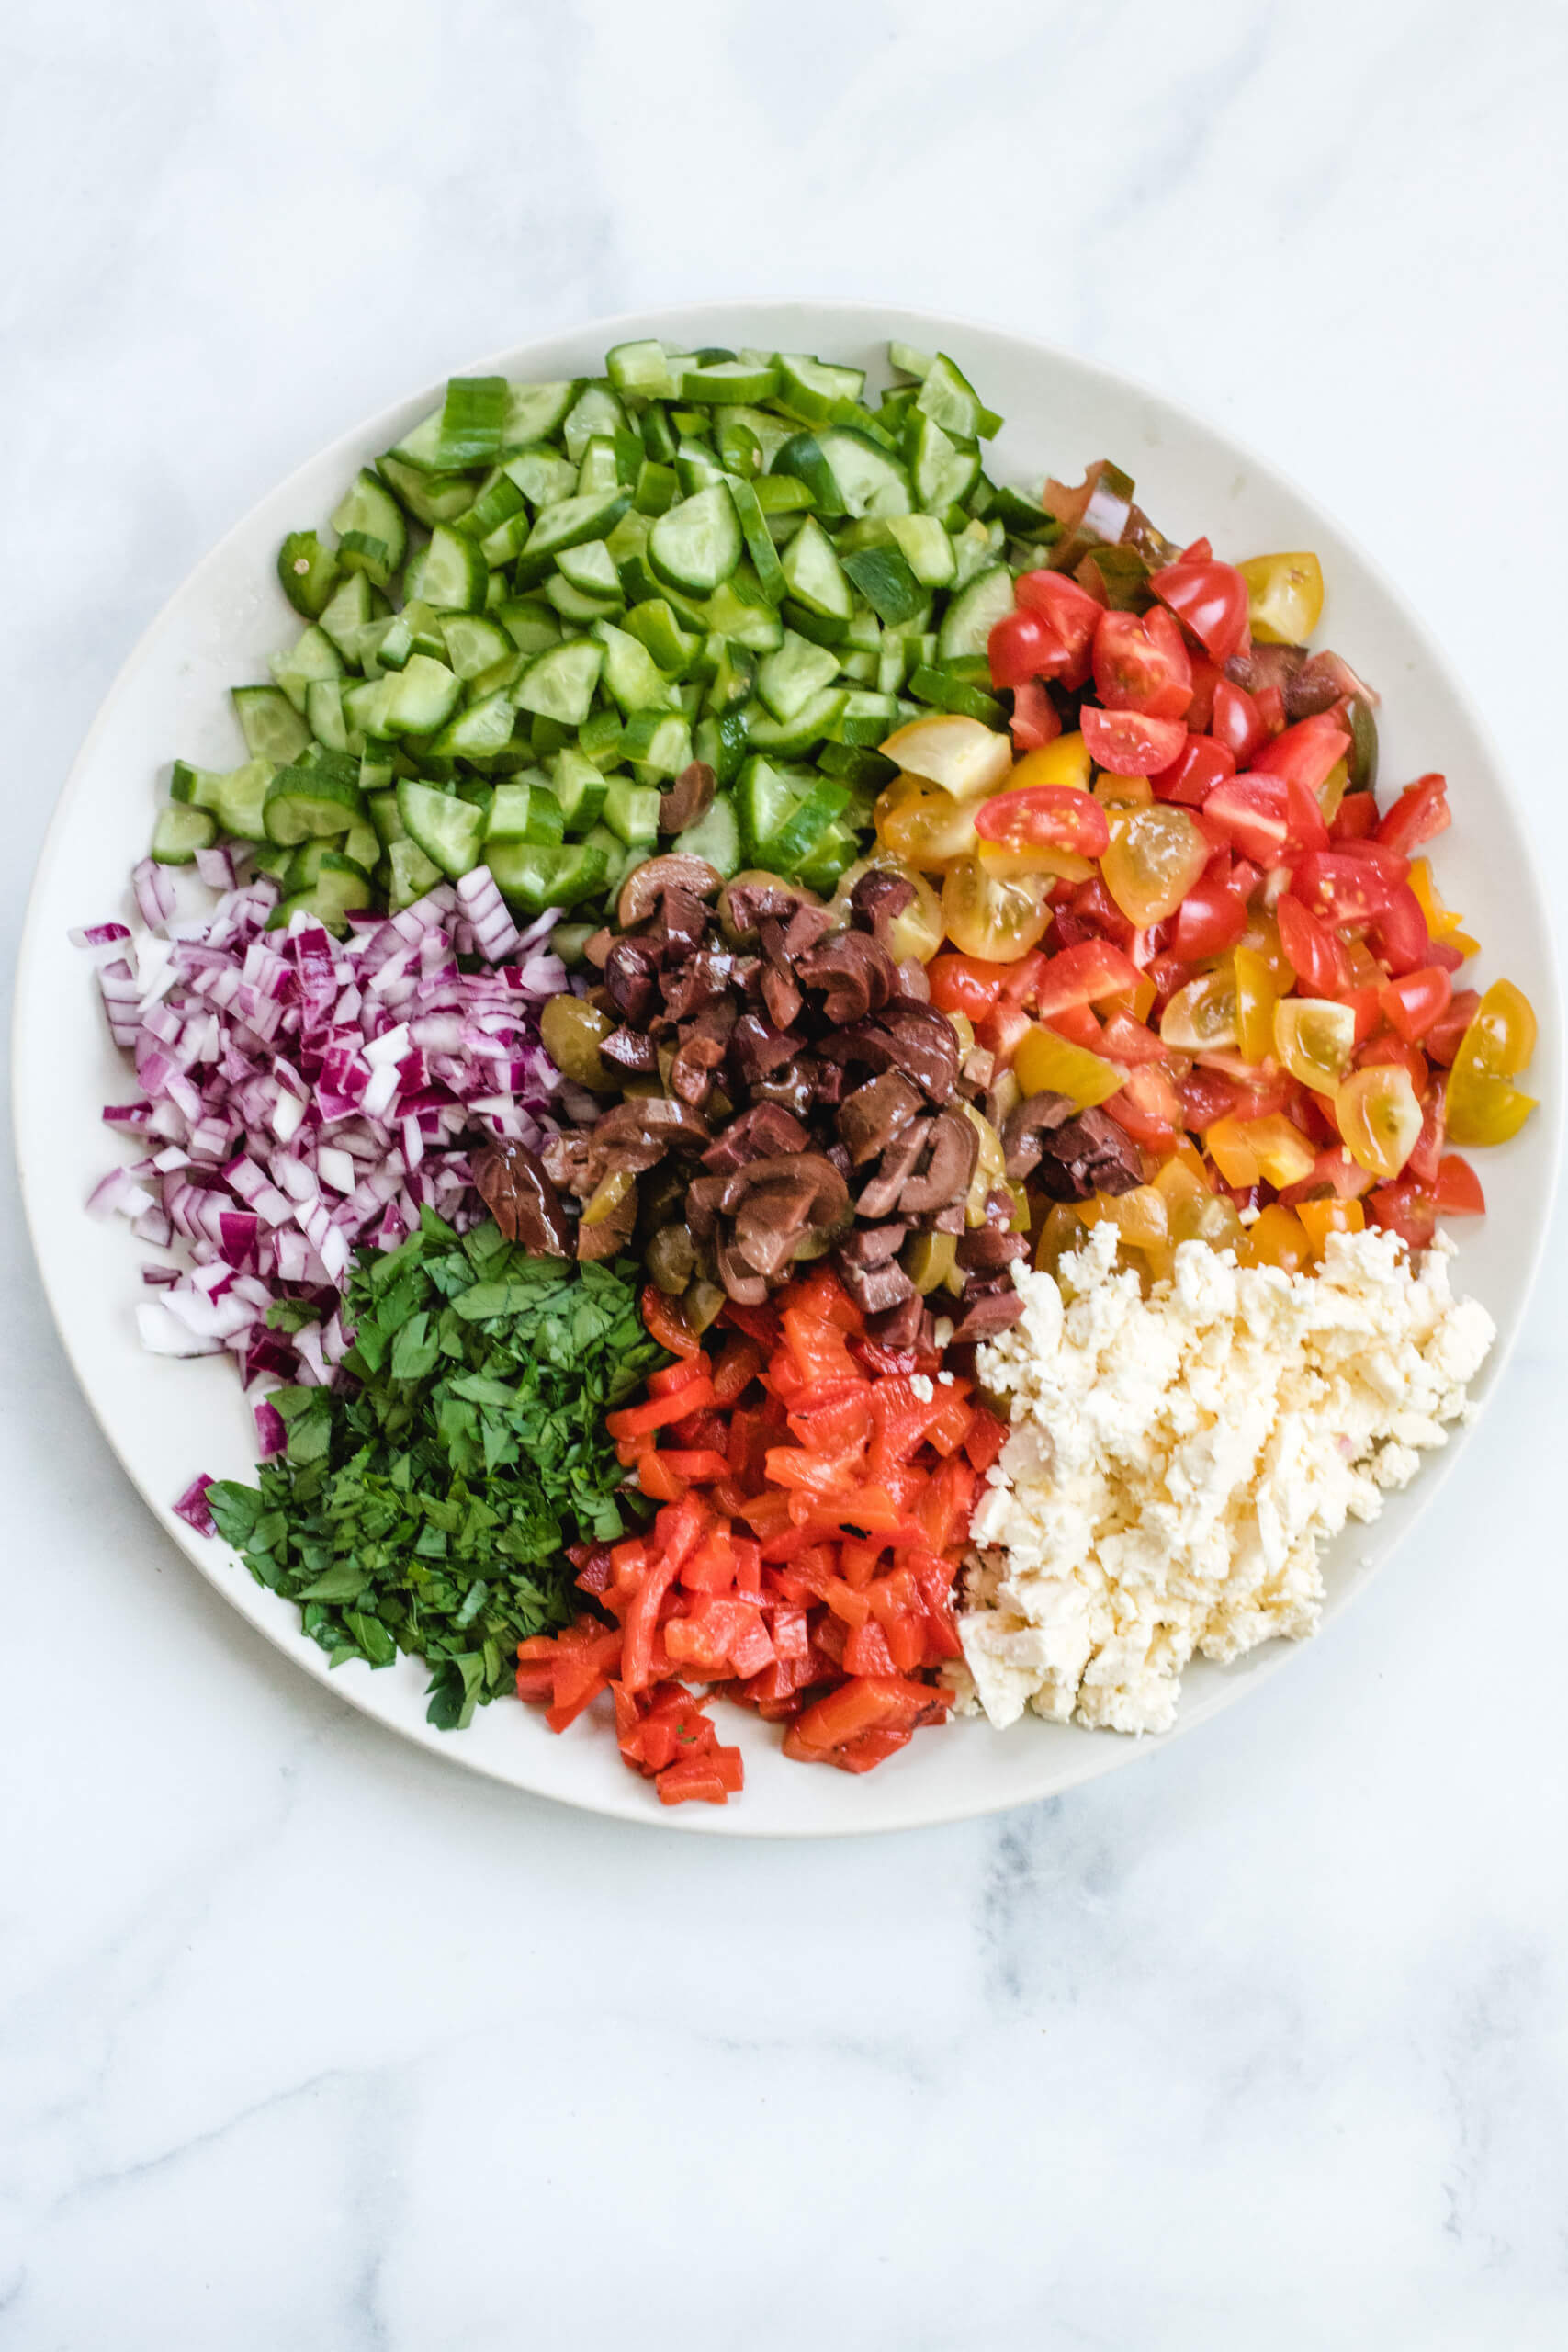 Finely diced ingredients for the Mediterranean chopped salad